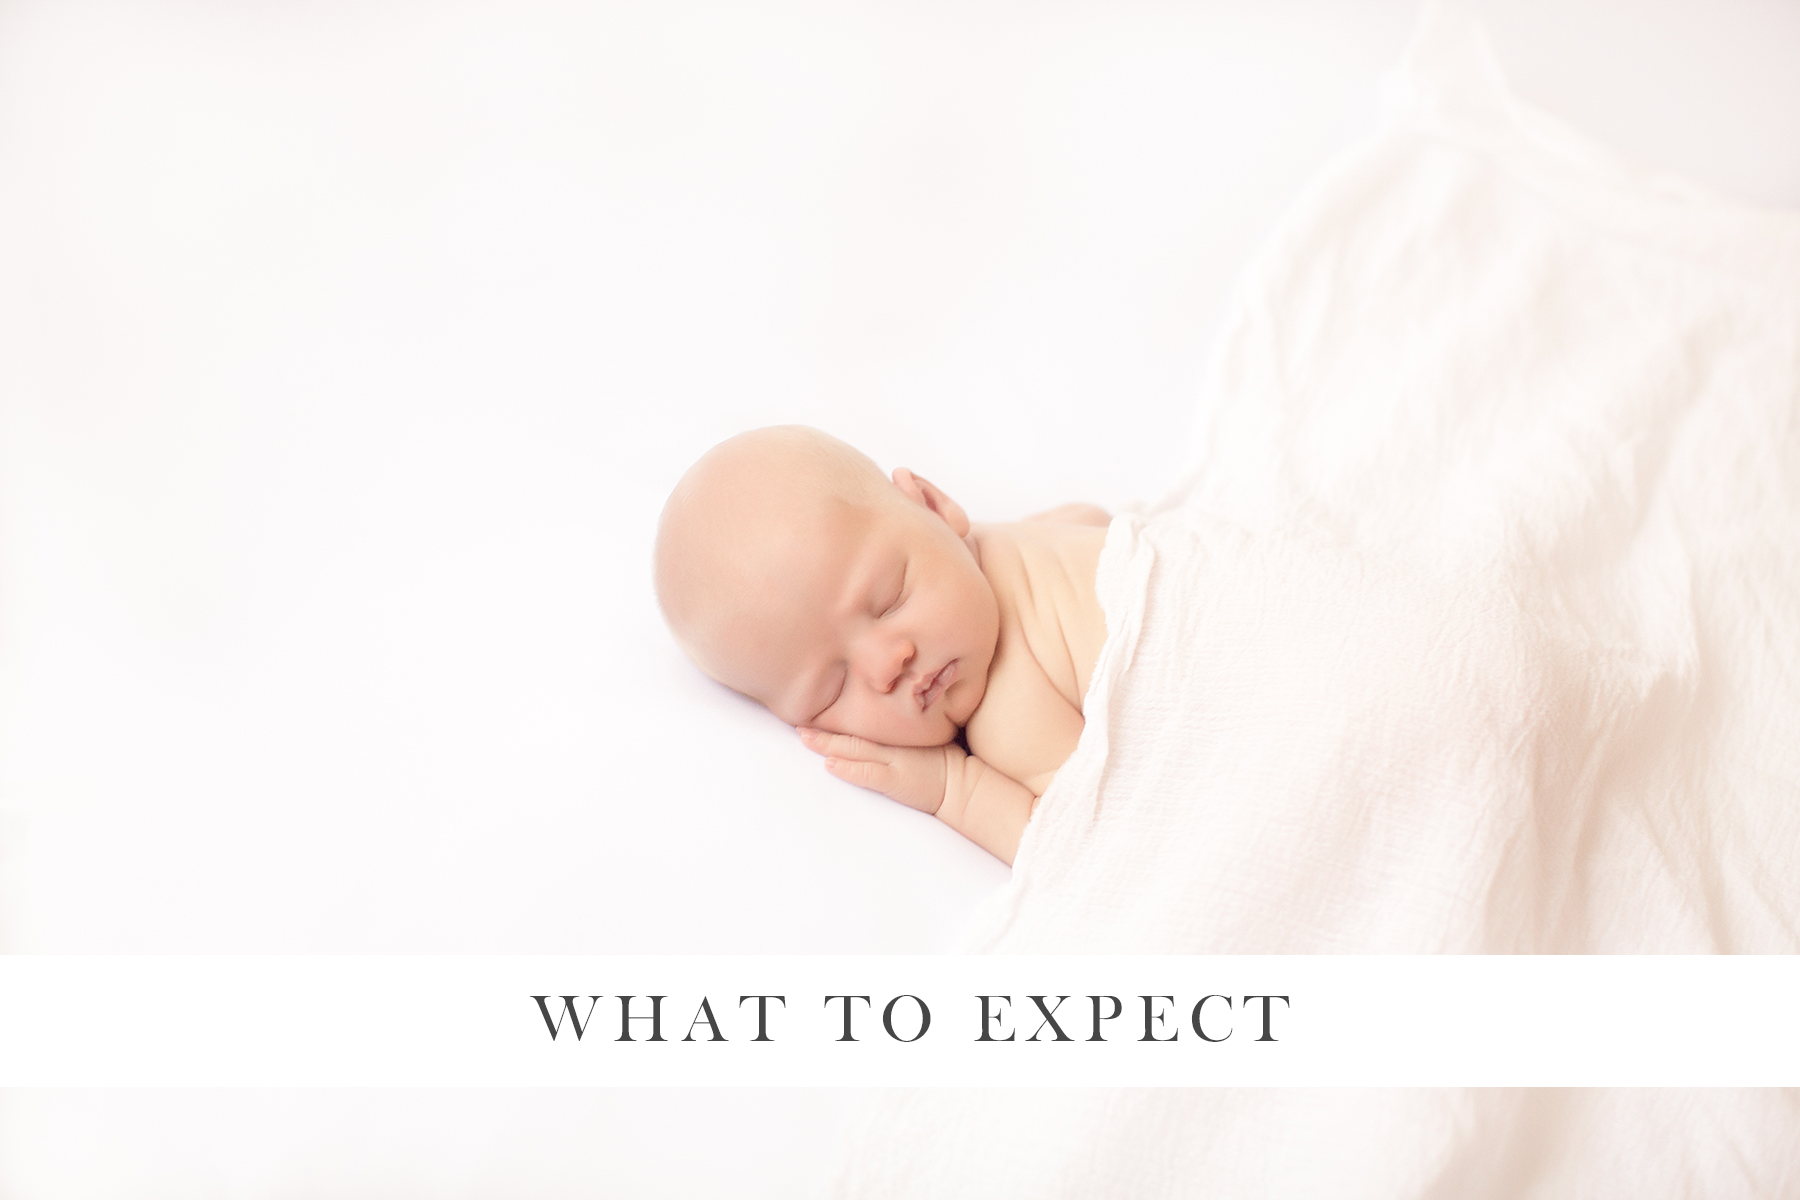 What to expect at your newborn photography session with Denver newborn photographer Jenni Maroney.